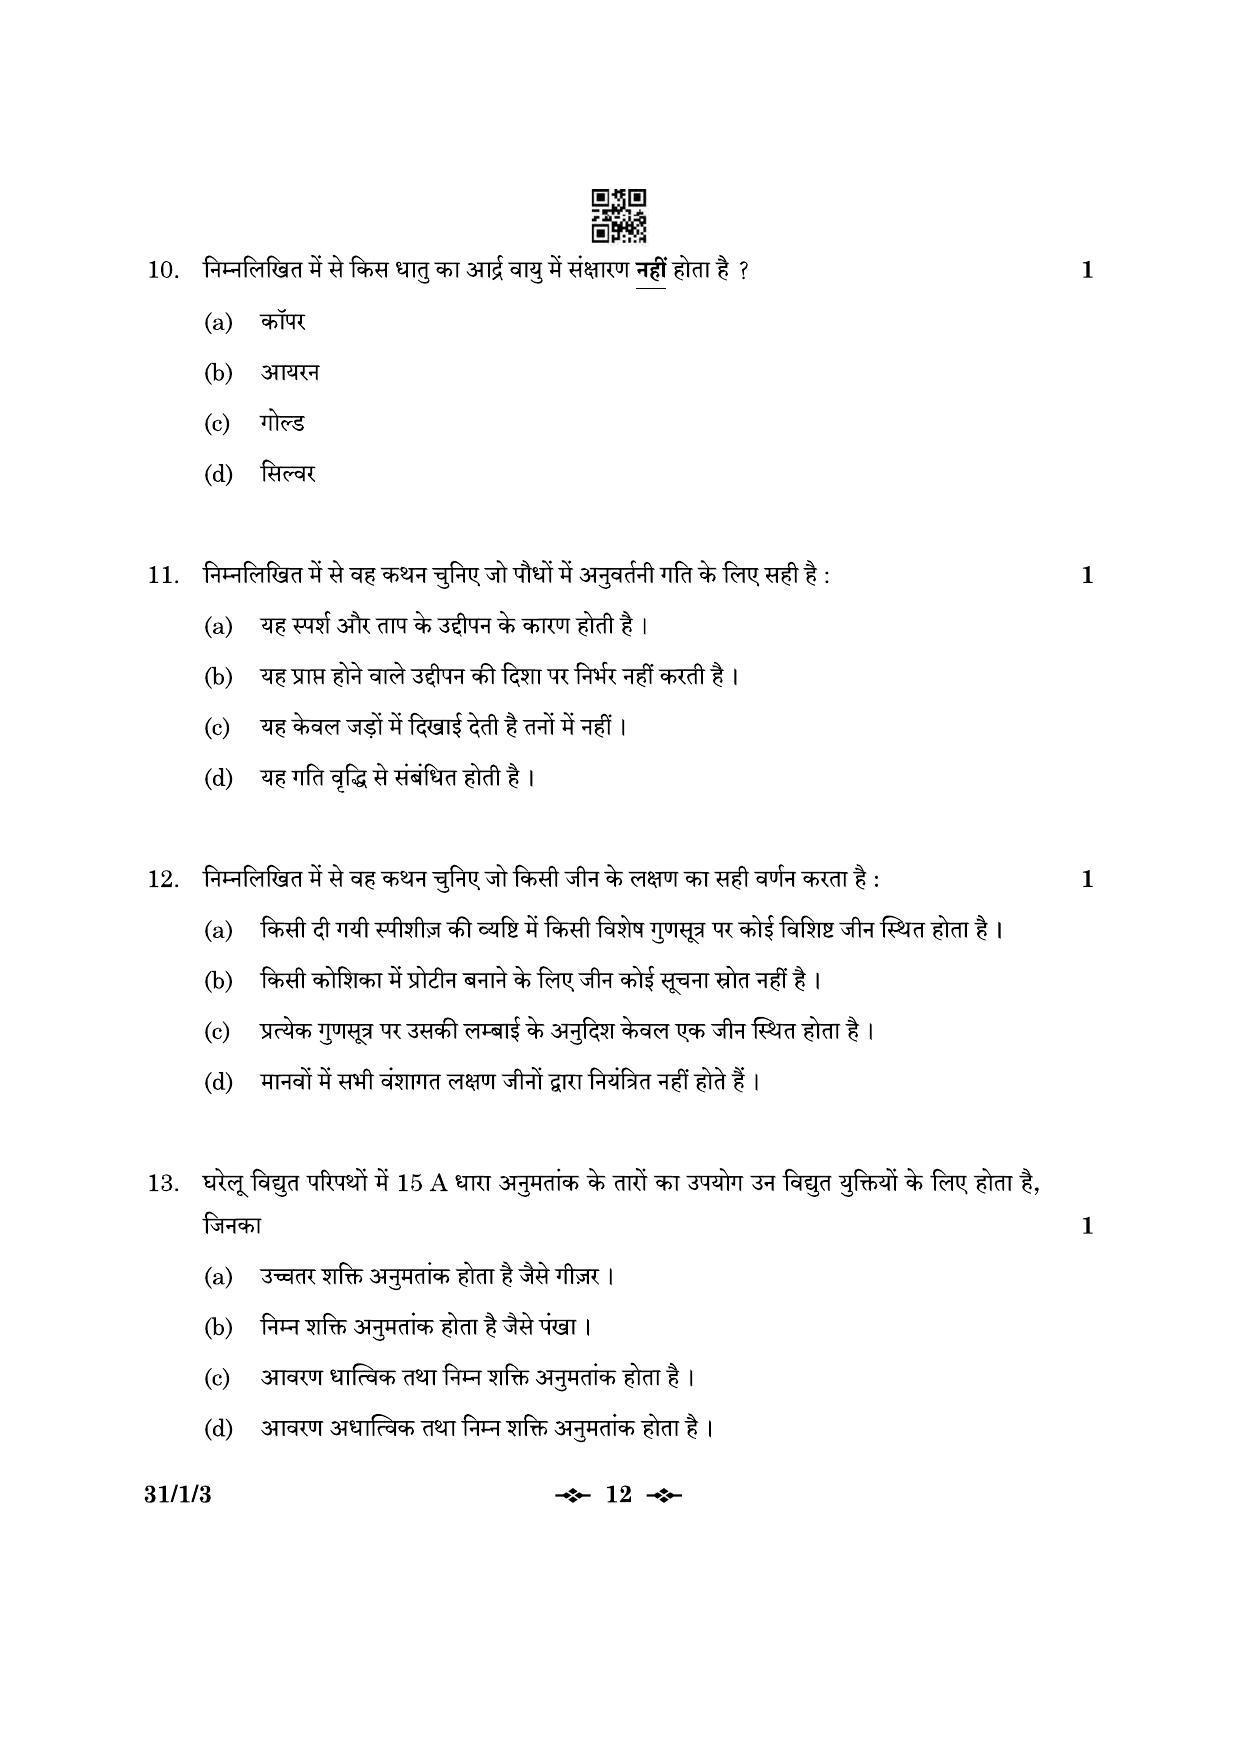 CBSE Class 10 31-1-3 Science 2023 Question Paper - Page 12